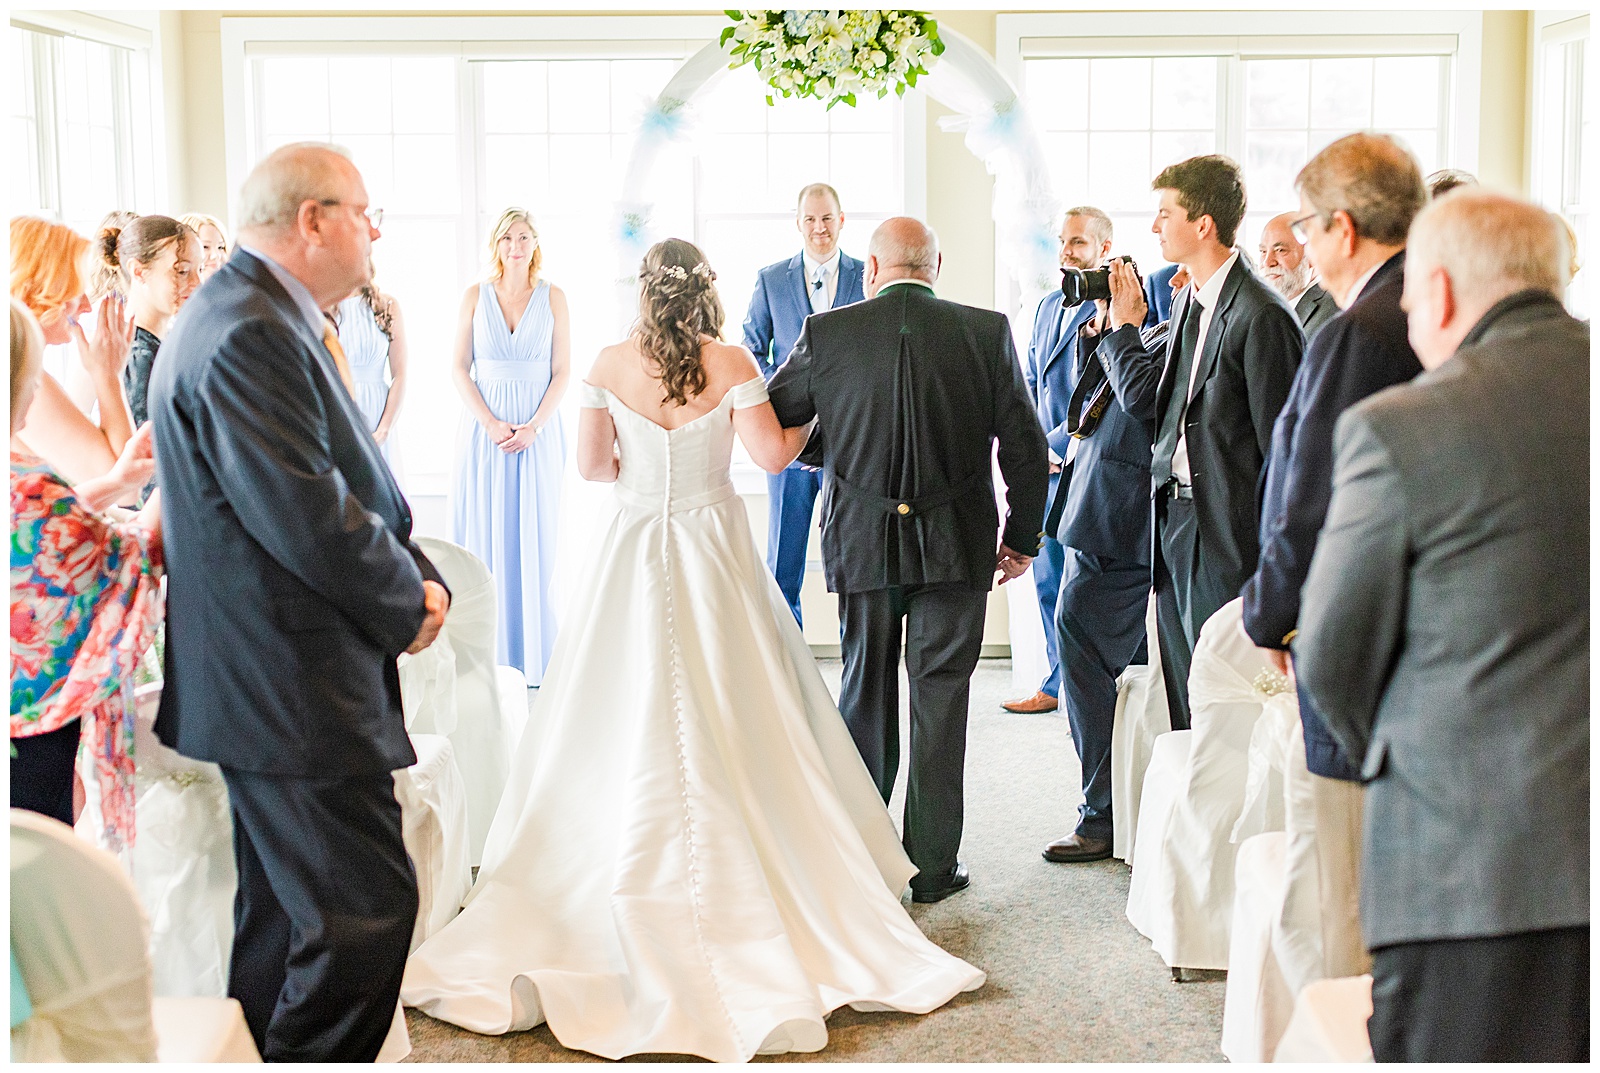 what order should the wedding processional be? a bride walking down the aisle with the Father of the Bride during a wedding ceremony.